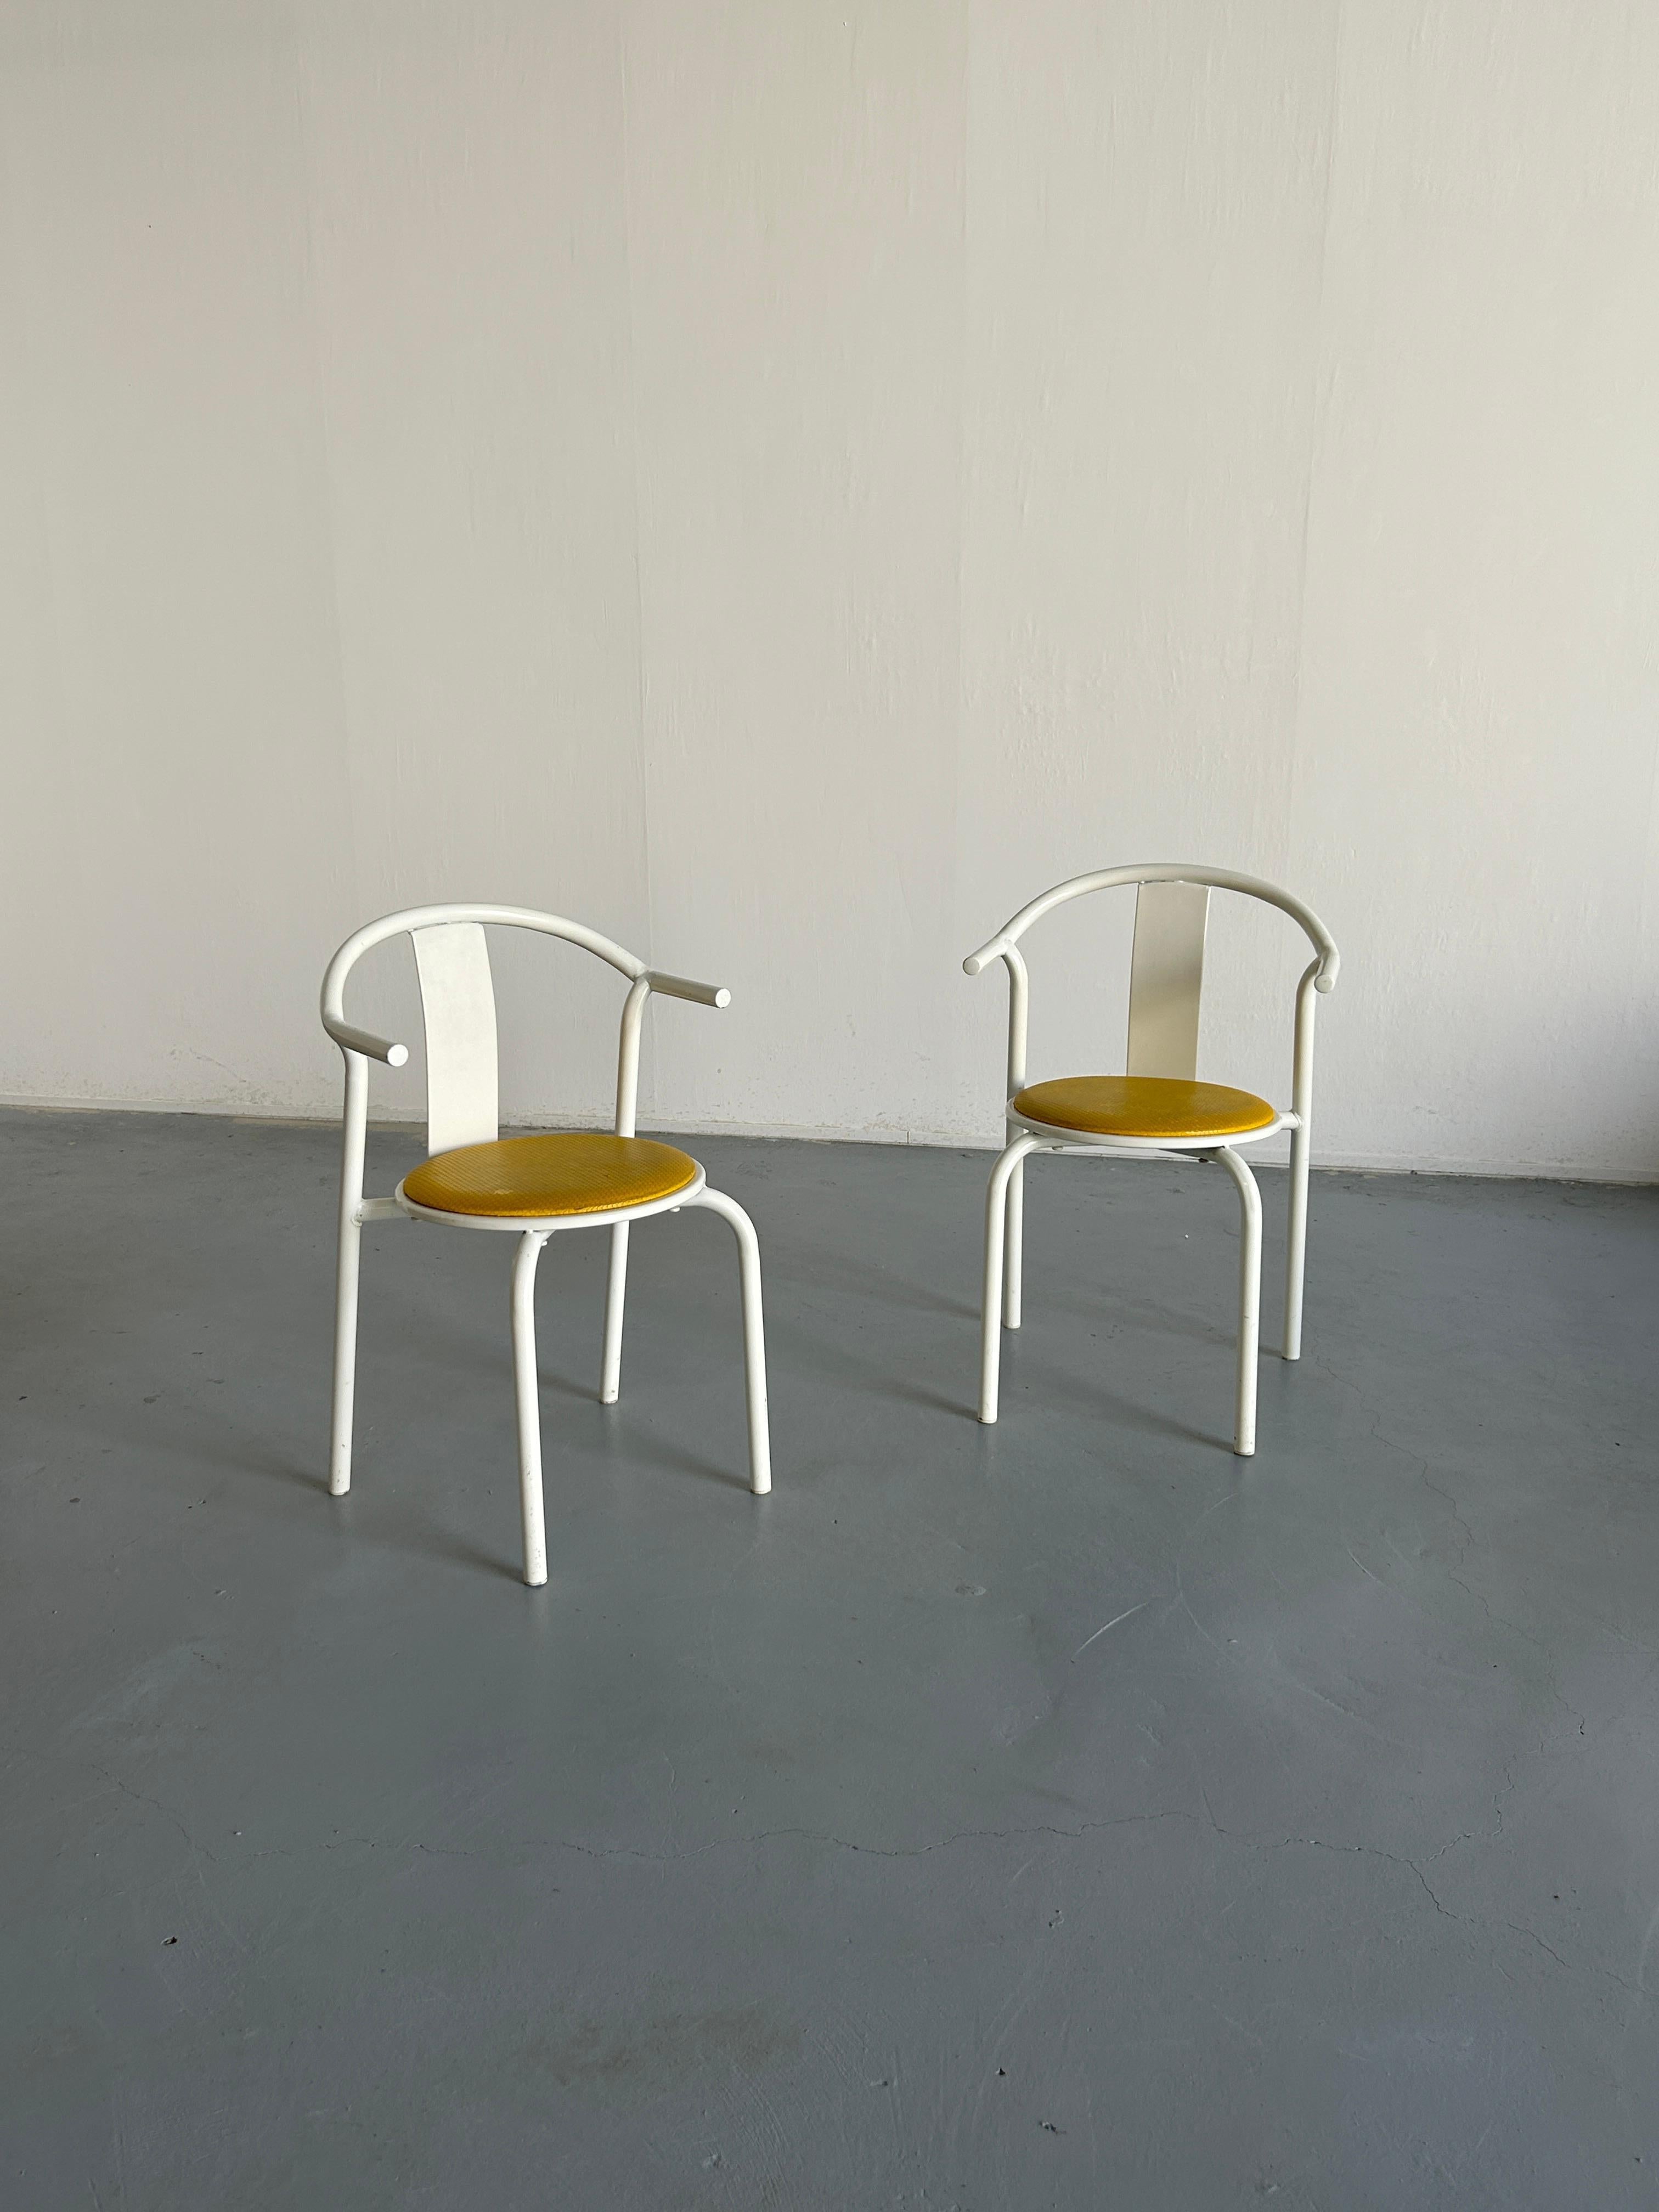 Set of two vintage 1980s Ikea MAXMO white and yellow metal dining chairs. 
Rare and collectible.

Overall in good vintage condition with expected signs of age. Structurally perfect.
One noticeable hole on the seat - as depicted in the photos. Hole